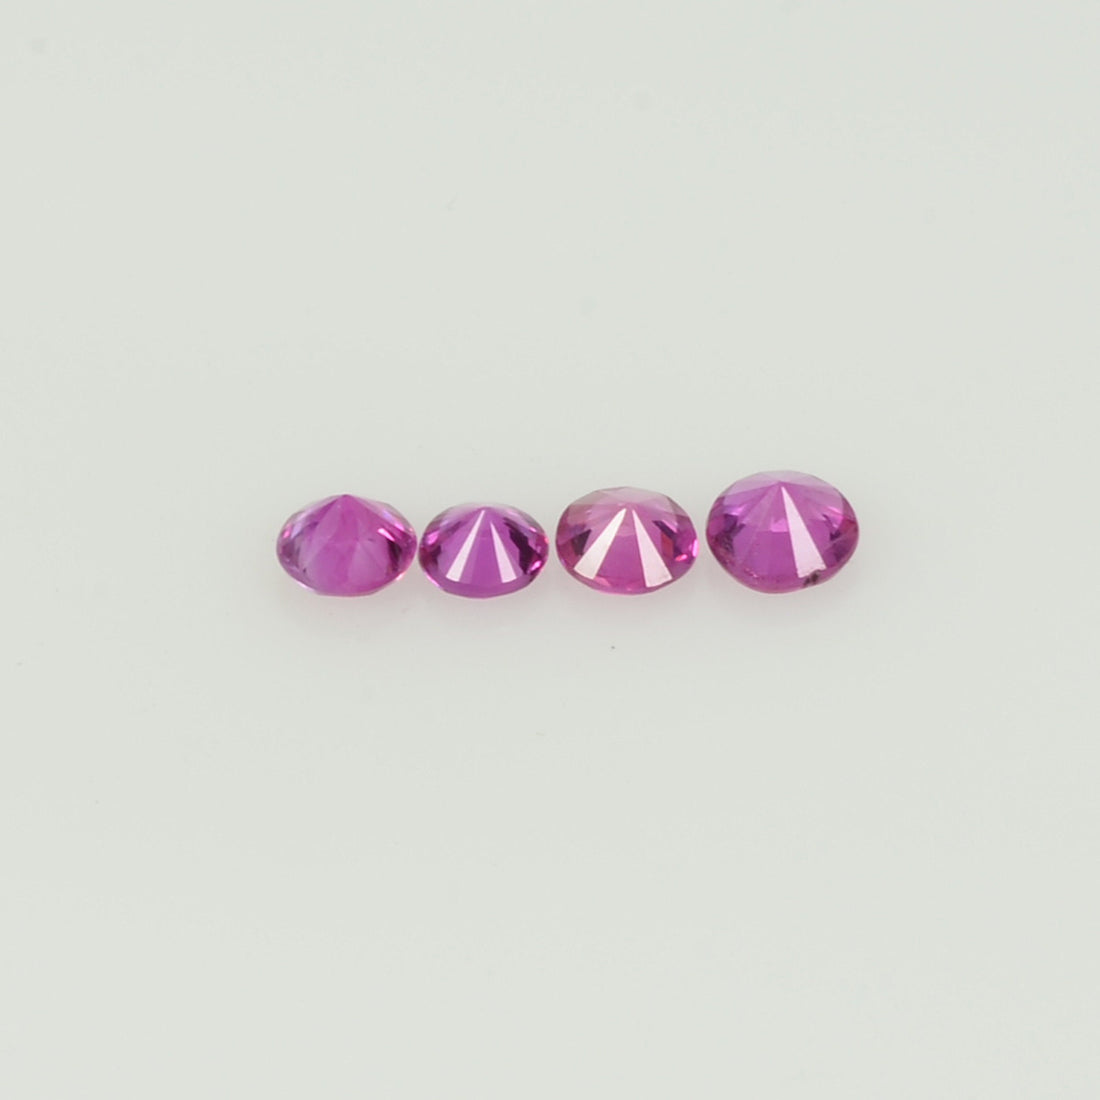 2.5 mm Natural Pink Sapphire Loose Gemstone Round Diamond Cut VS Quality AA Color